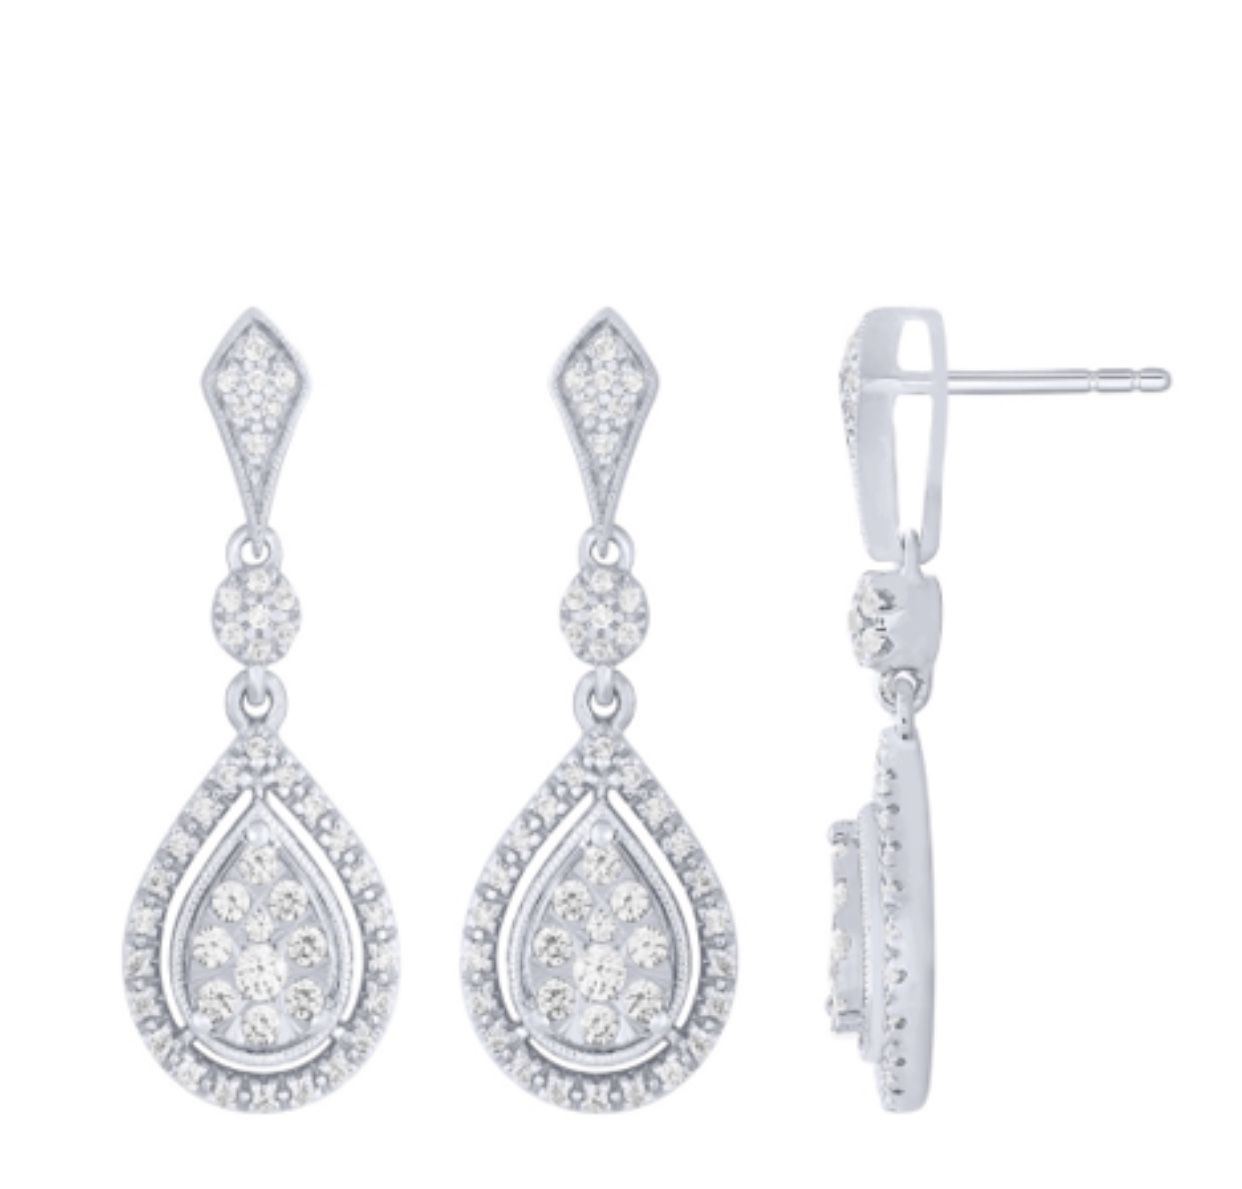 Earrings white gold and diamond - 50%